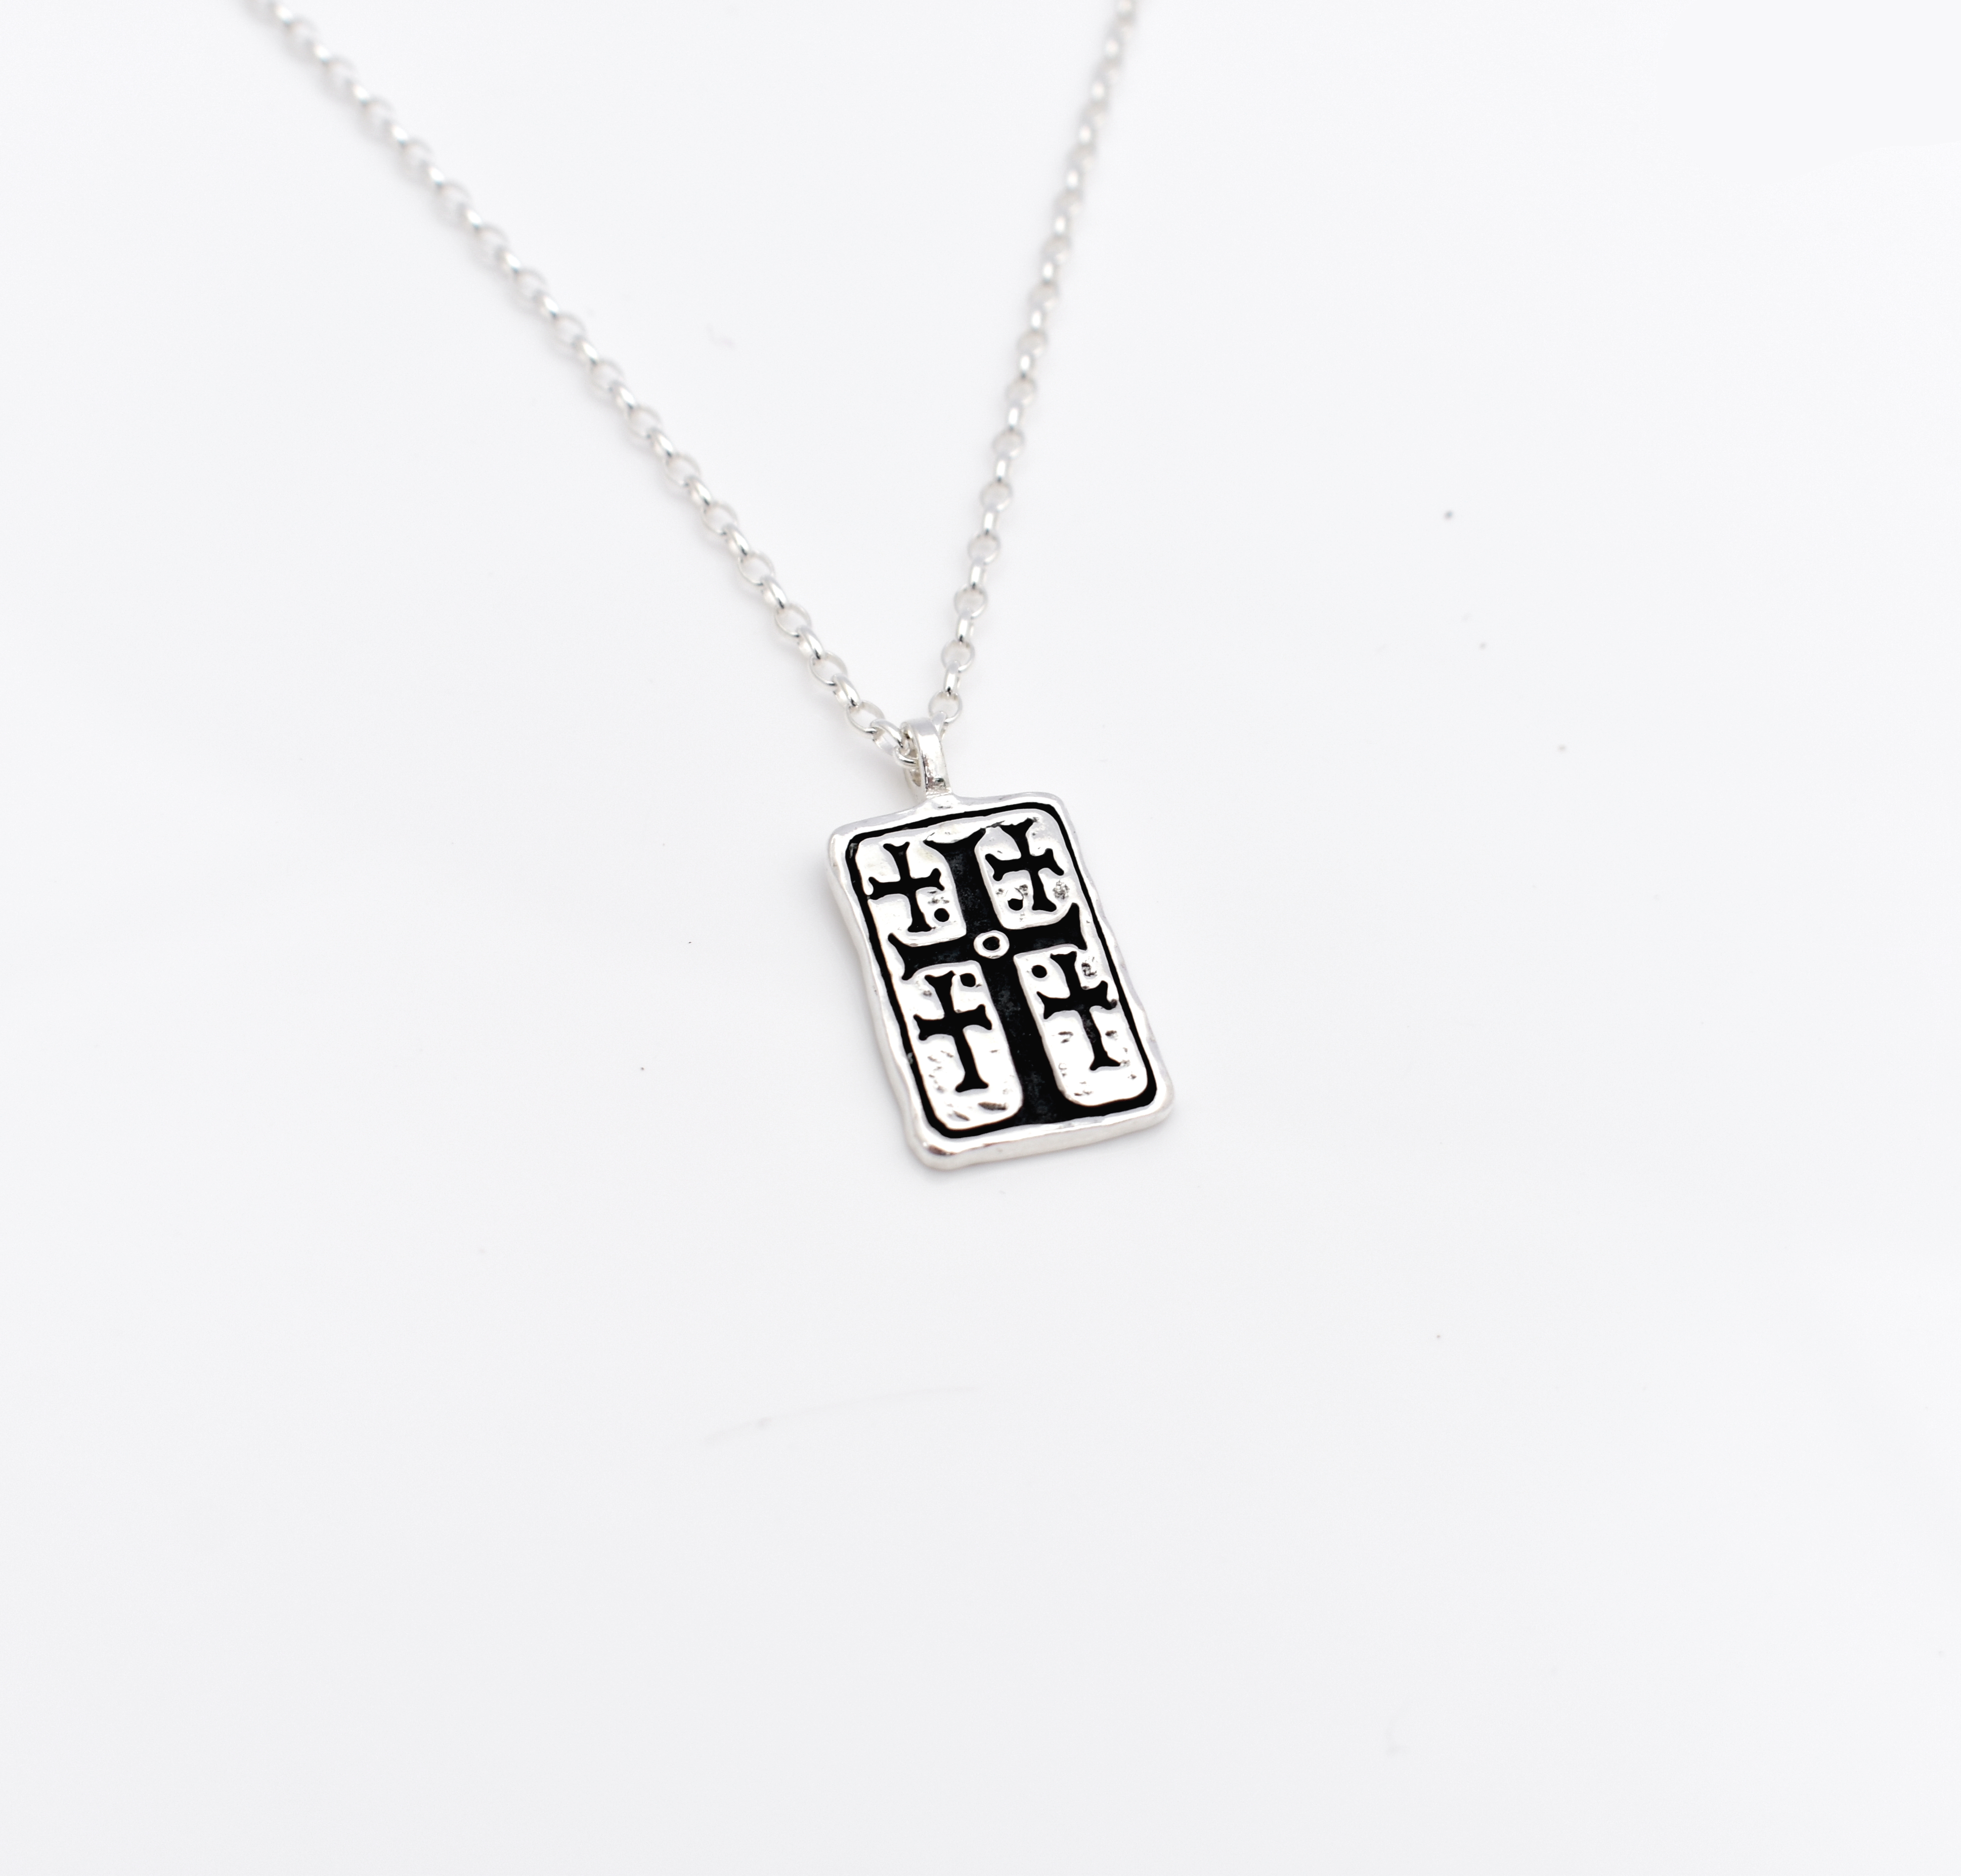 Inismurray | Sterling Silver Square Cross Pendant | Medium | The Cat & The Moon